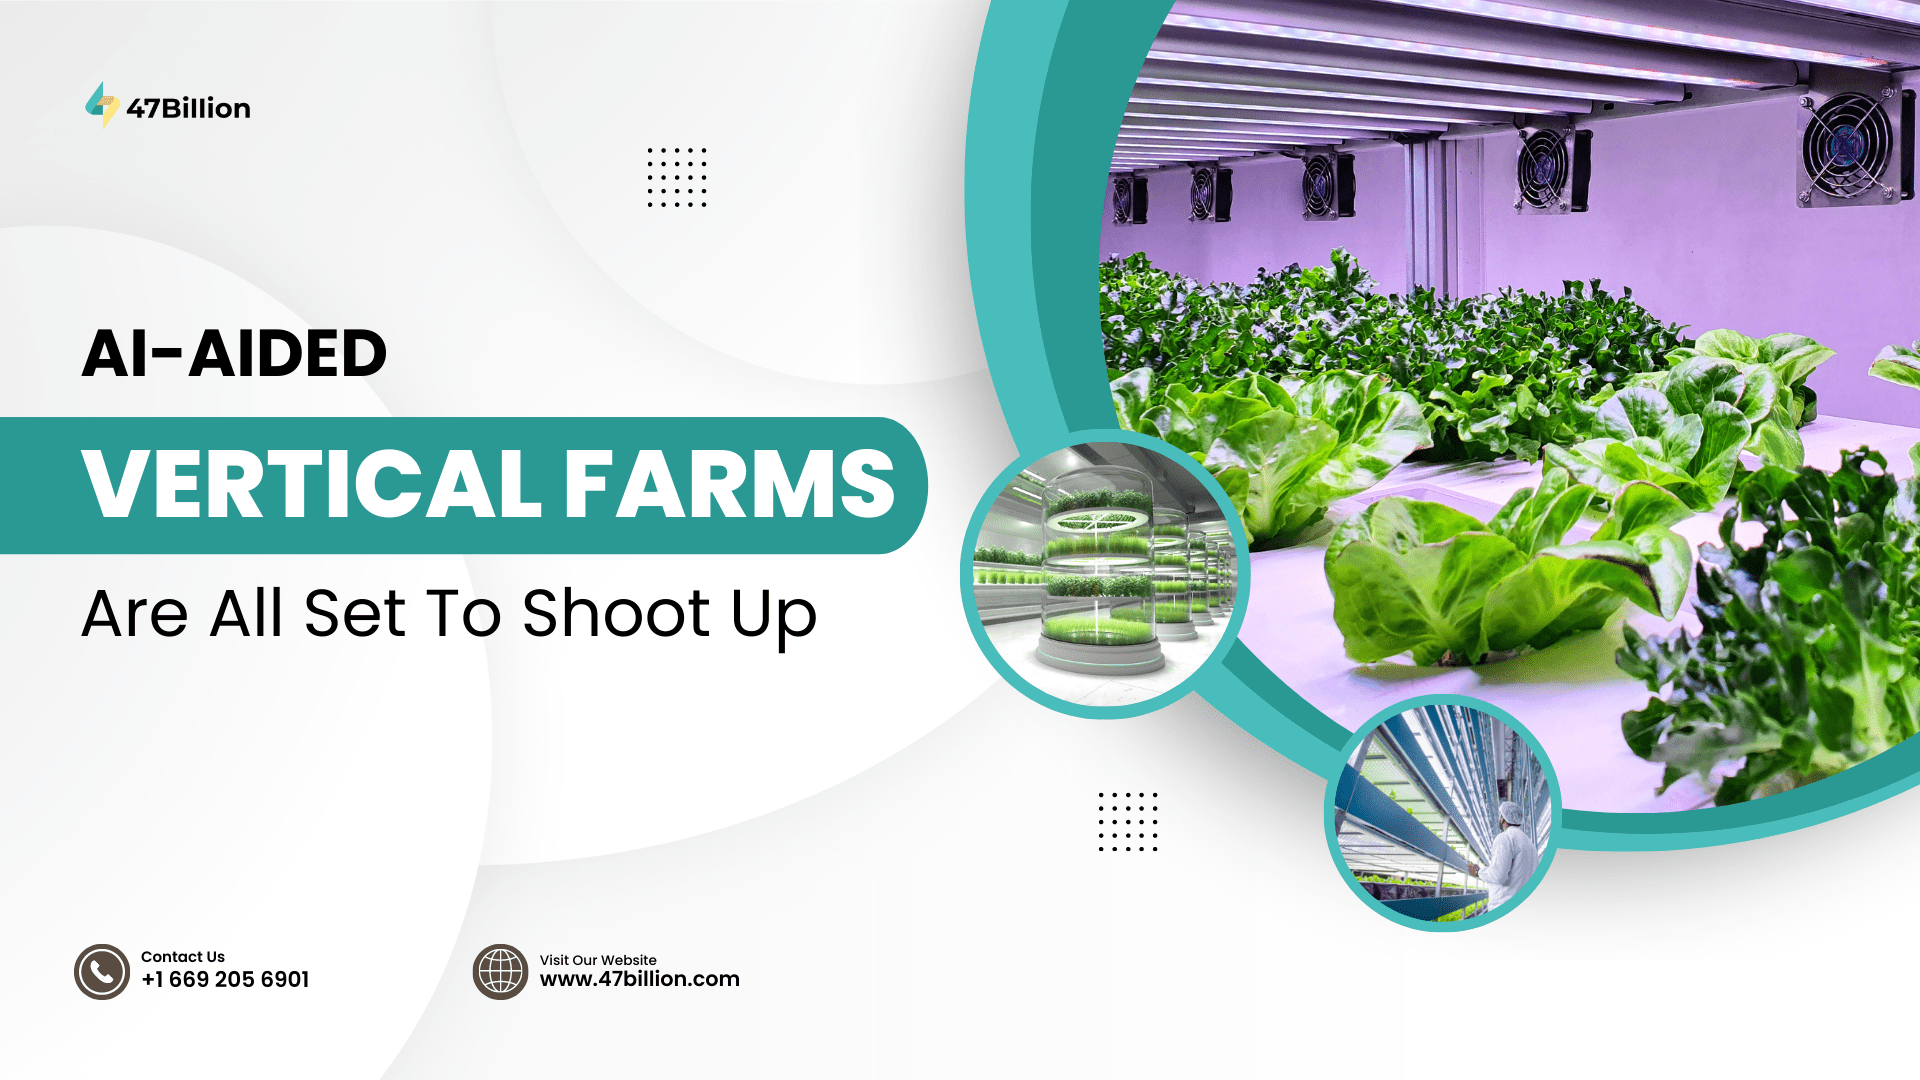 AI-aided-Vertical-Farms-Are-All-Set-To-Shoot-Up